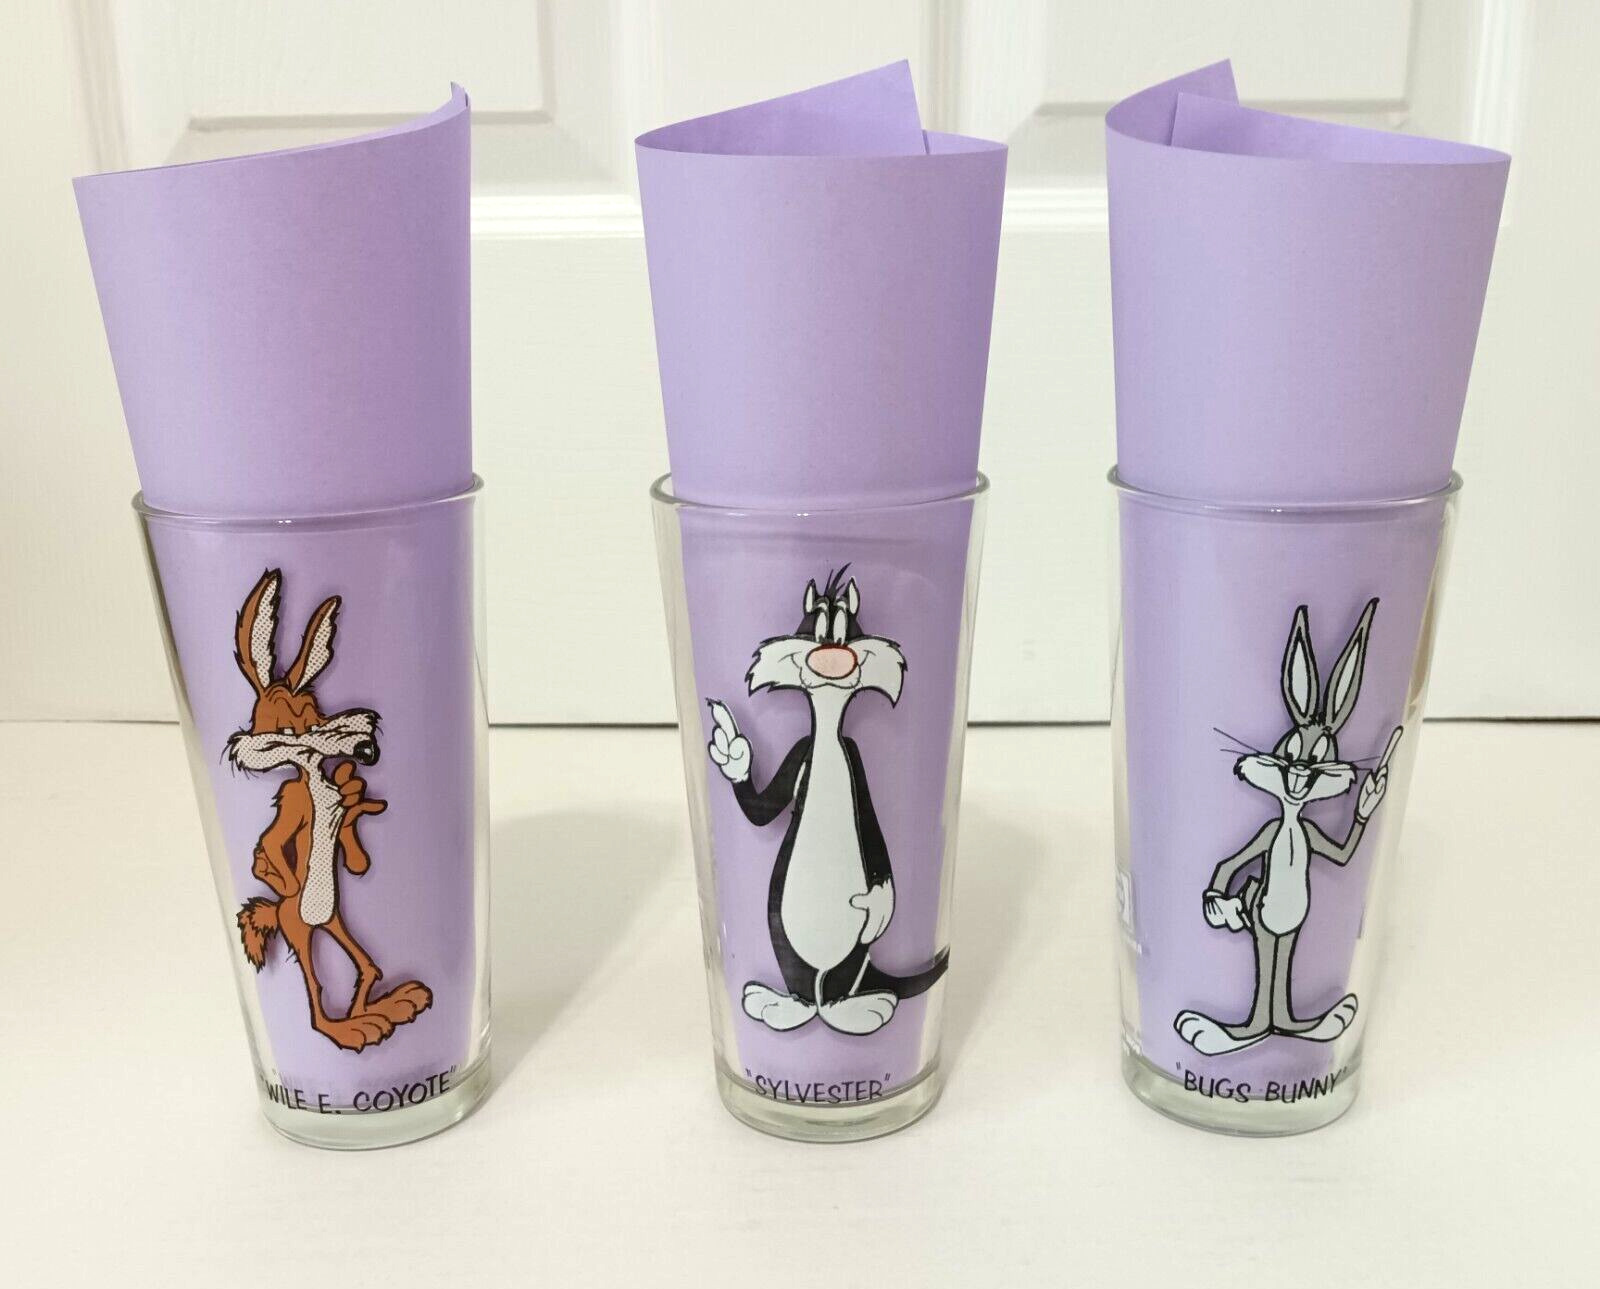 Lot of 3 Vintage 1973 Pepsi Looney Tunes Glasses, Wile, Sylvester, and Bugs